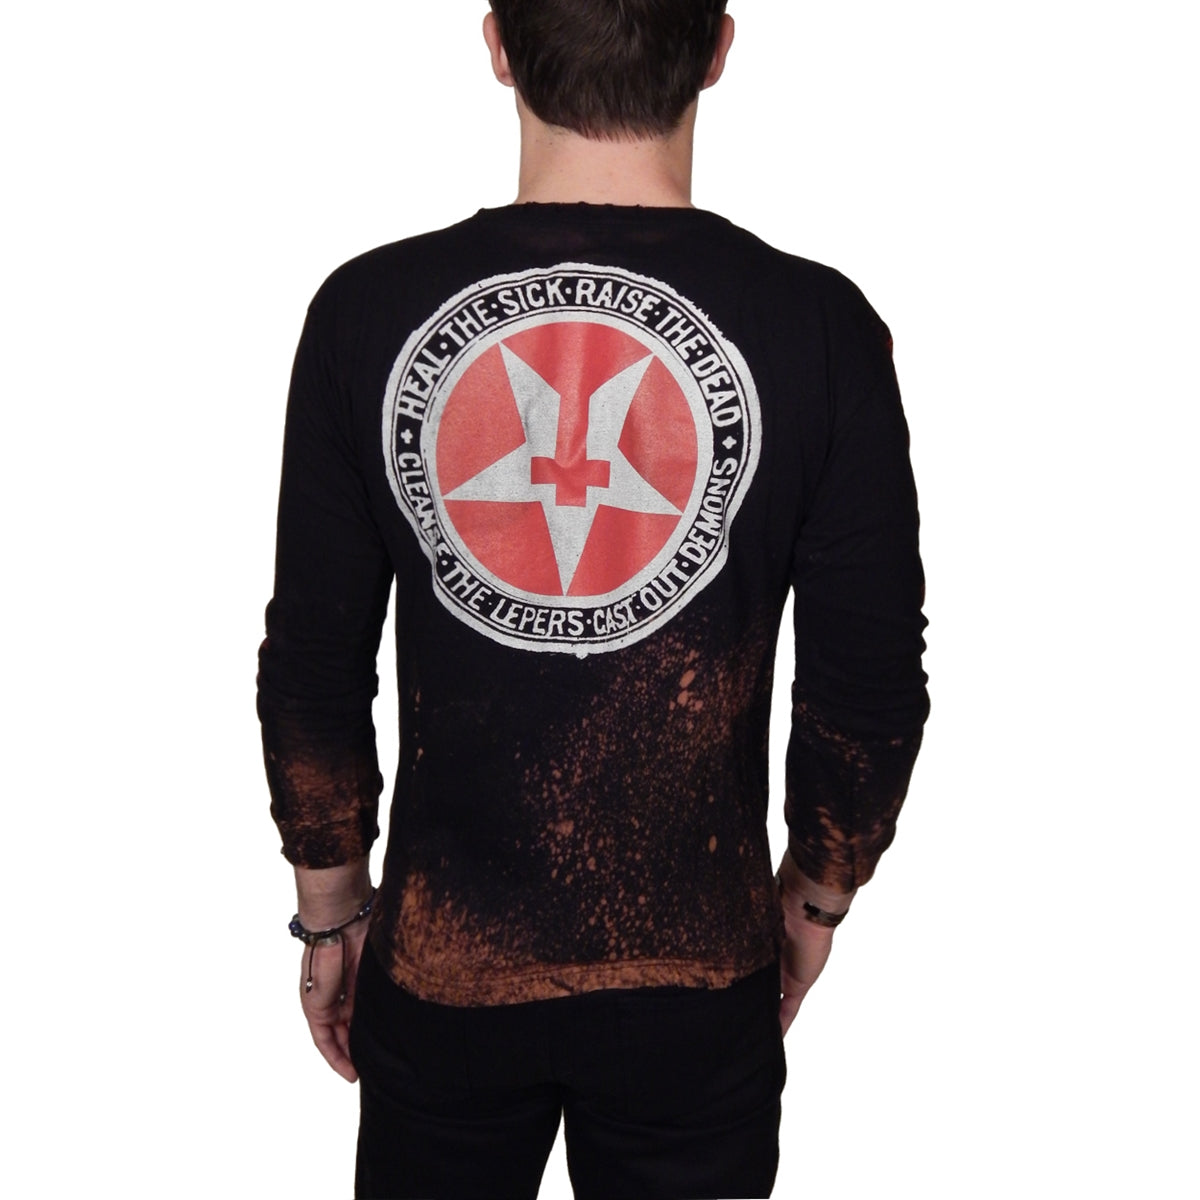 JUNKER DESIGNS - &quot;WOLFHEAD - VANCE KELLY&quot; Exclusive Long Sleeved Shirt